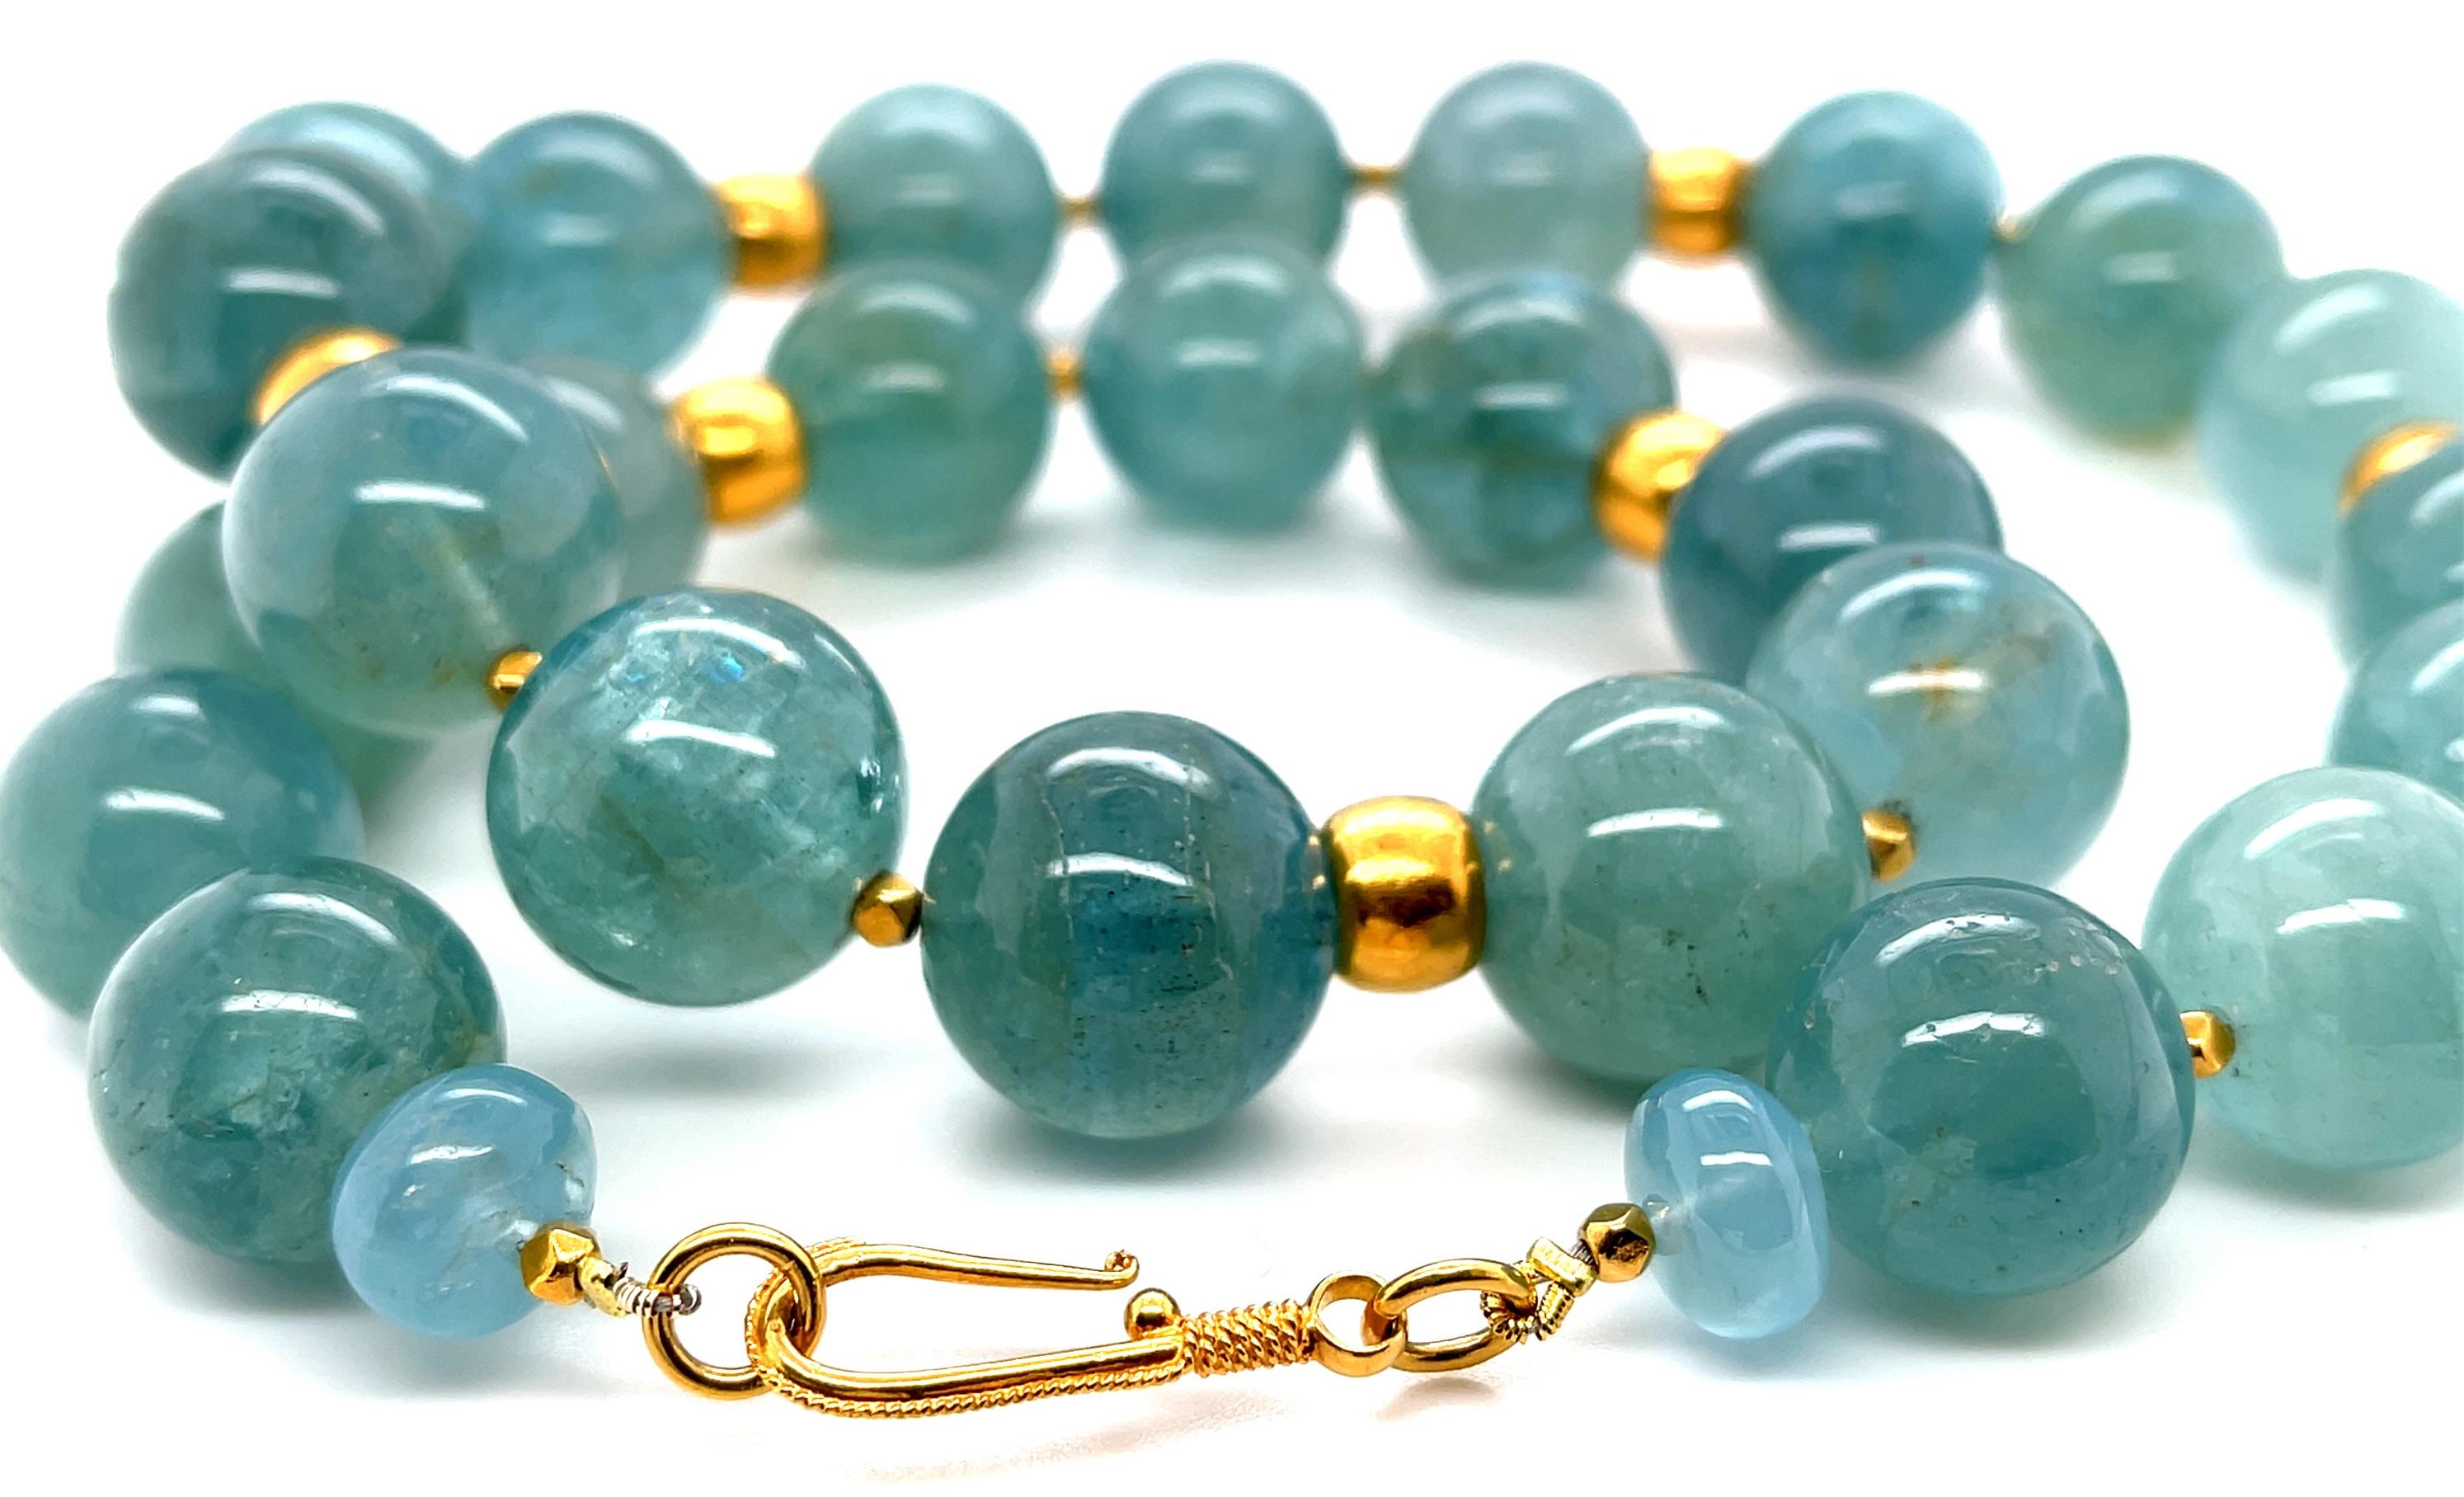 This stunning necklace features an impressive collection of large, 16mm round aquamarine beads with lovely, natural sea foam green color! The beads are beautifully matched, varying from pastel to deeper shades of a gorgeous and versatile color that